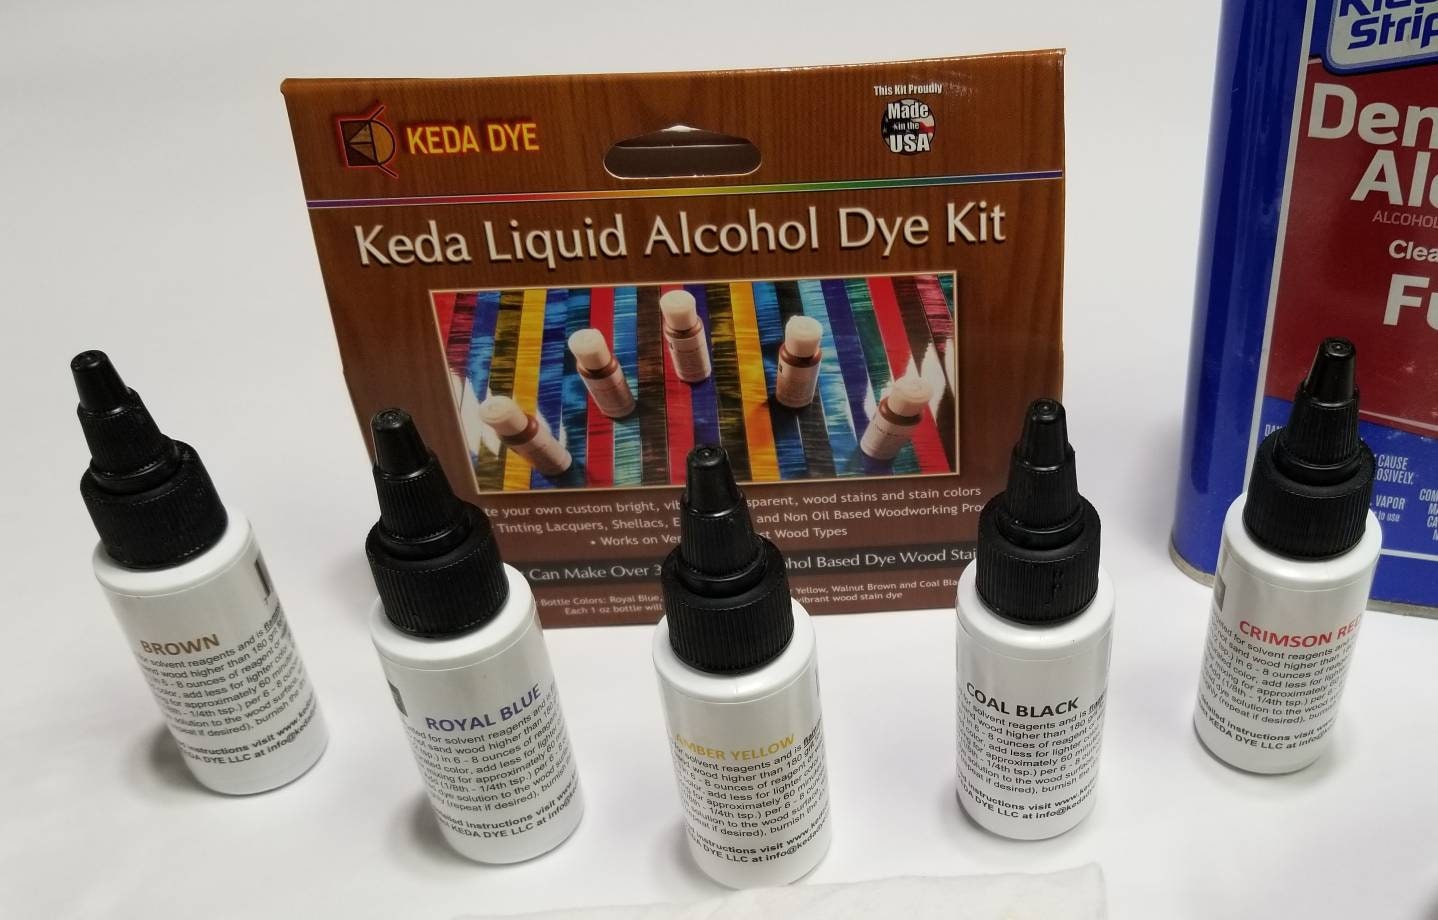 Vibrant Wood Dye Liquid Offered in 5 Color Liquid Dye Kit - Solvent Alcohol Dye